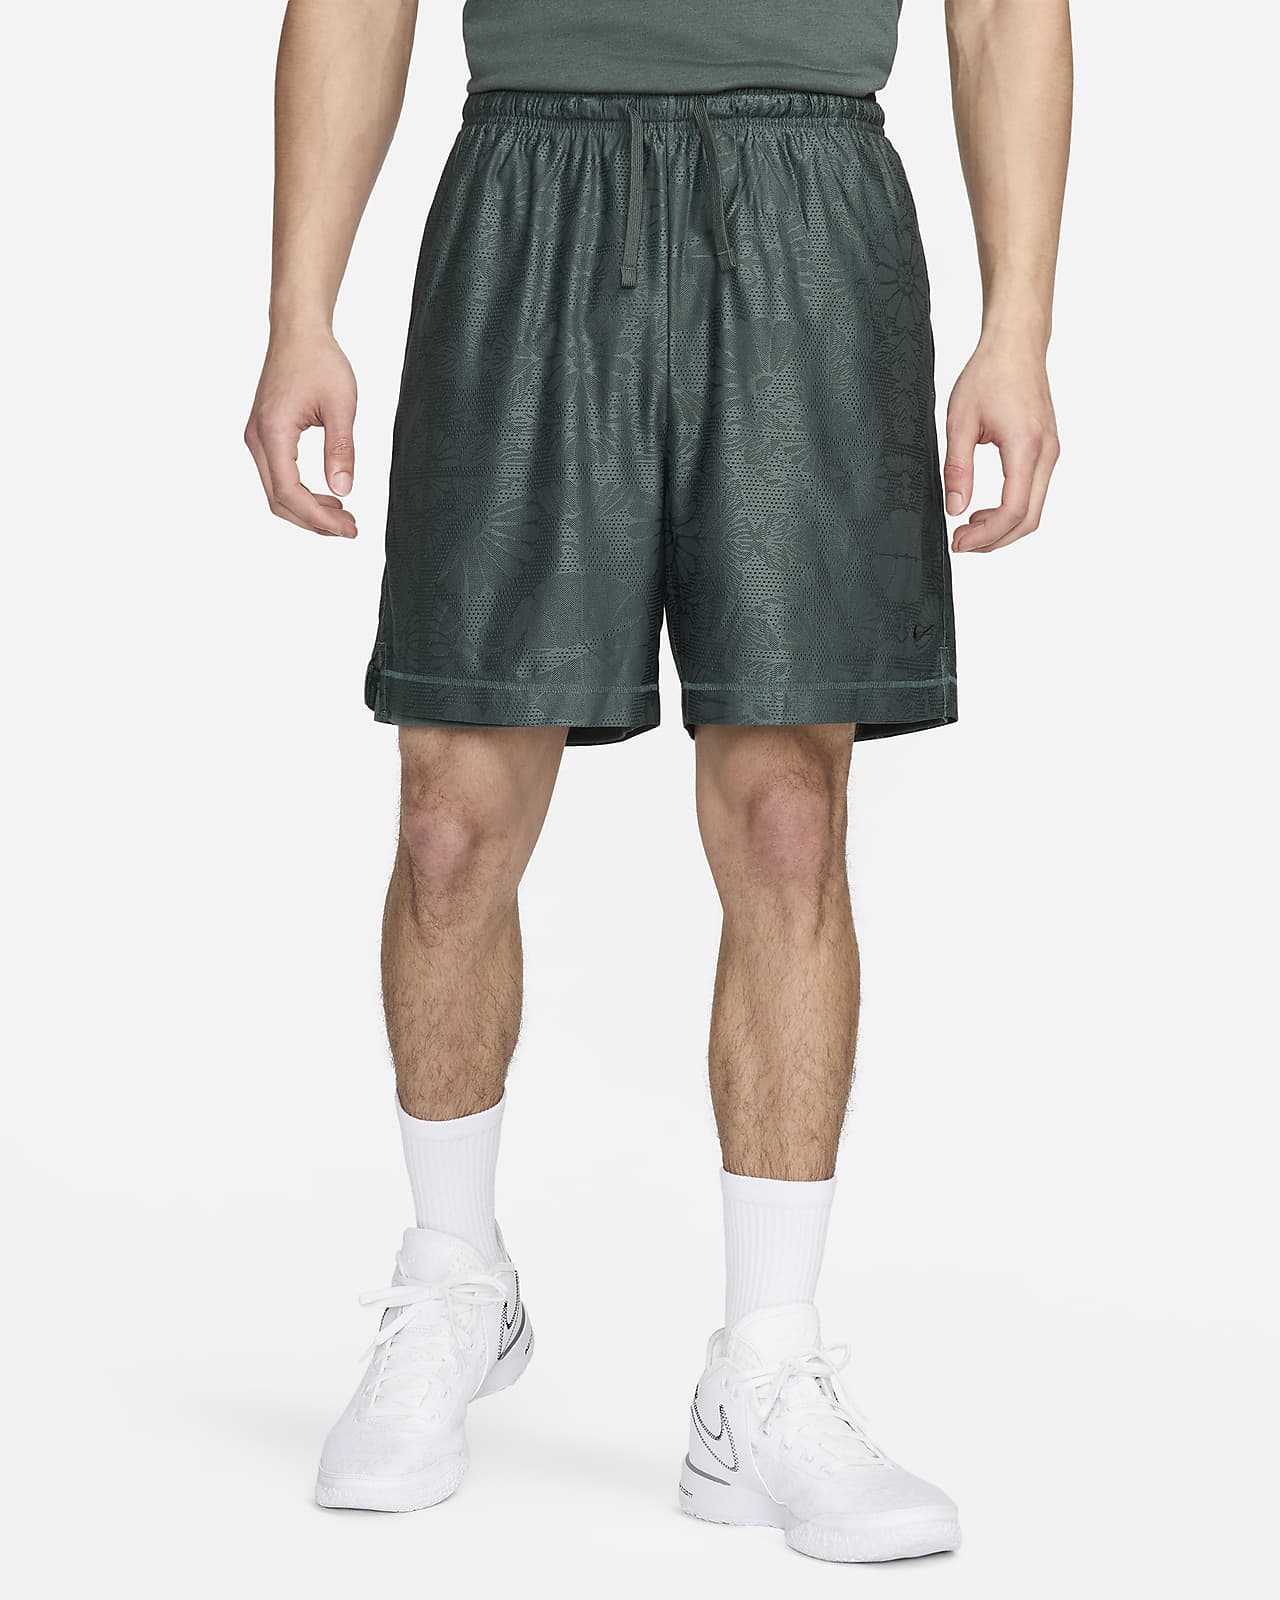 Nike Standard Issue Men's 15cm (approx.) Dri-FIT Reversible Basketball Shorts